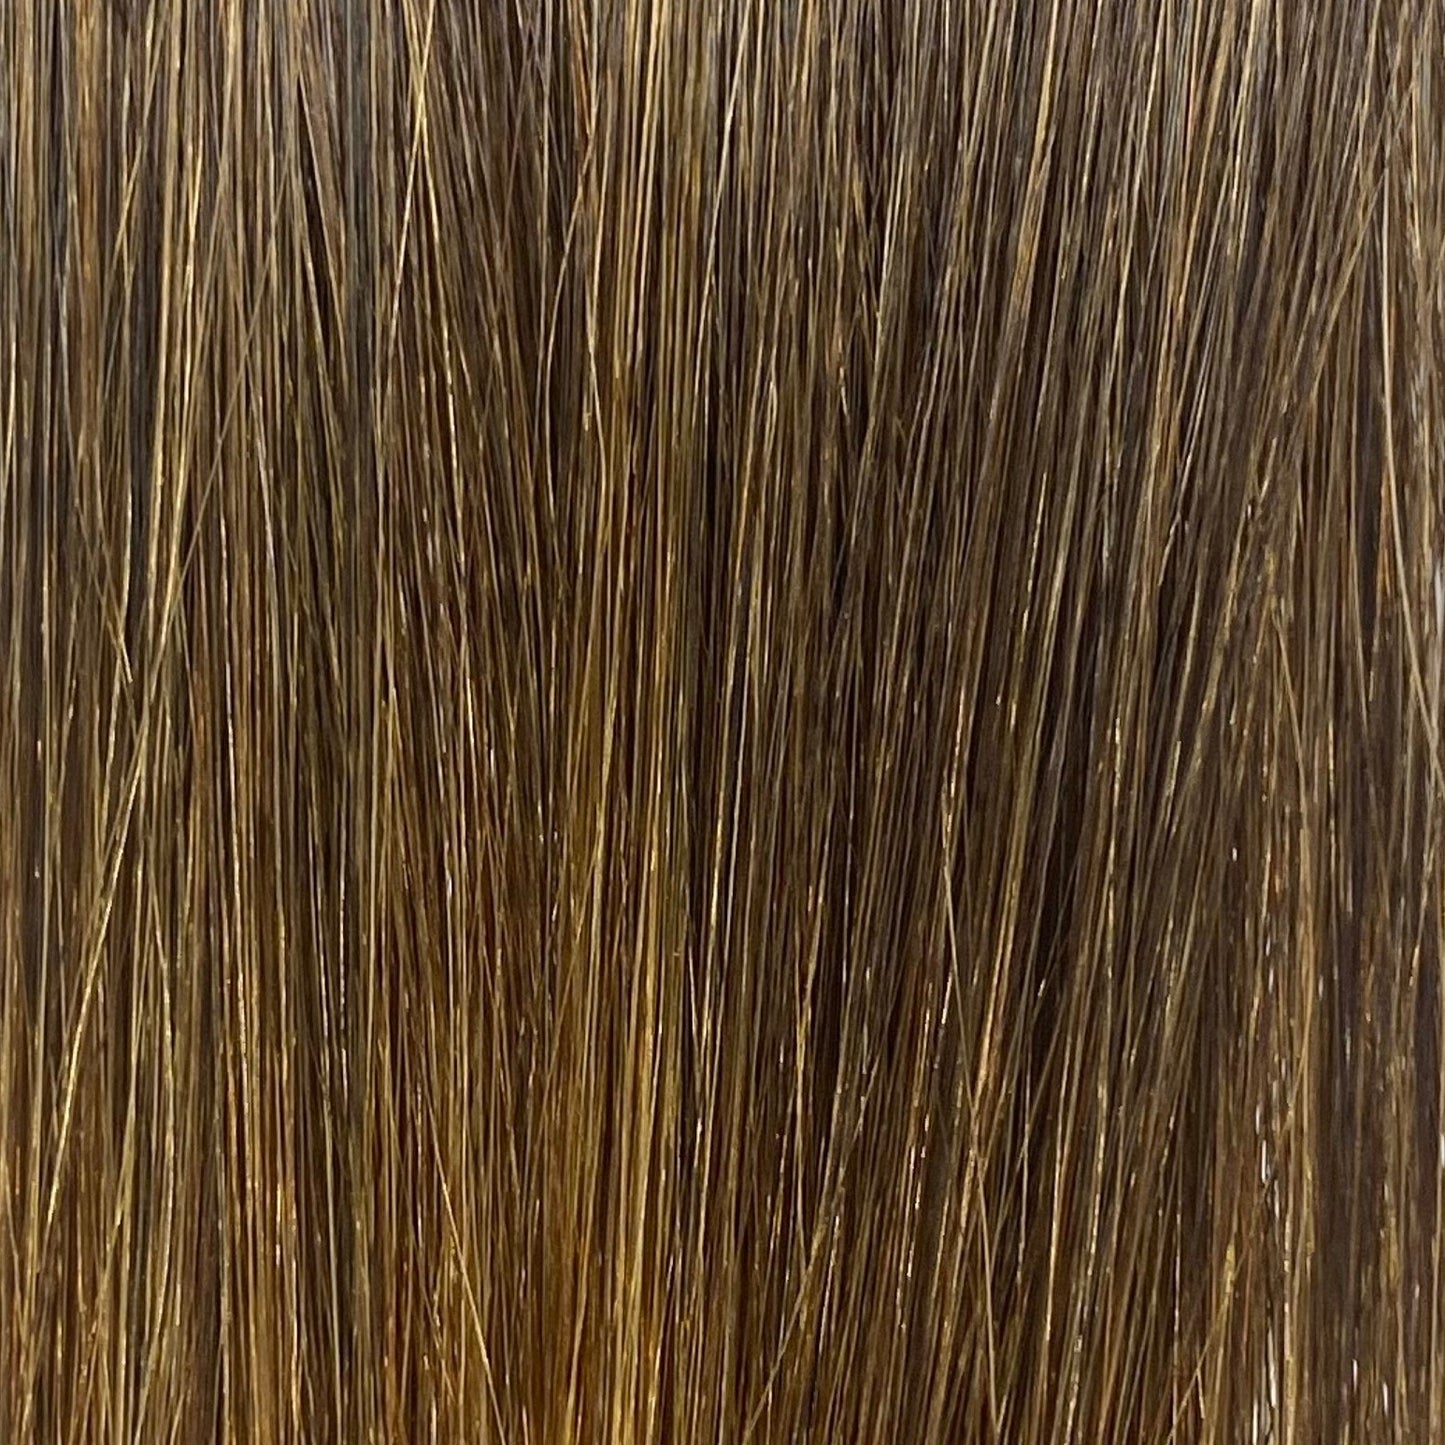 Fusion hair extensions #4 & 14 - 50cm/20 inches - Chestnut into Copper Golden Light Blonde Ombre Fusion Euro So Cap 